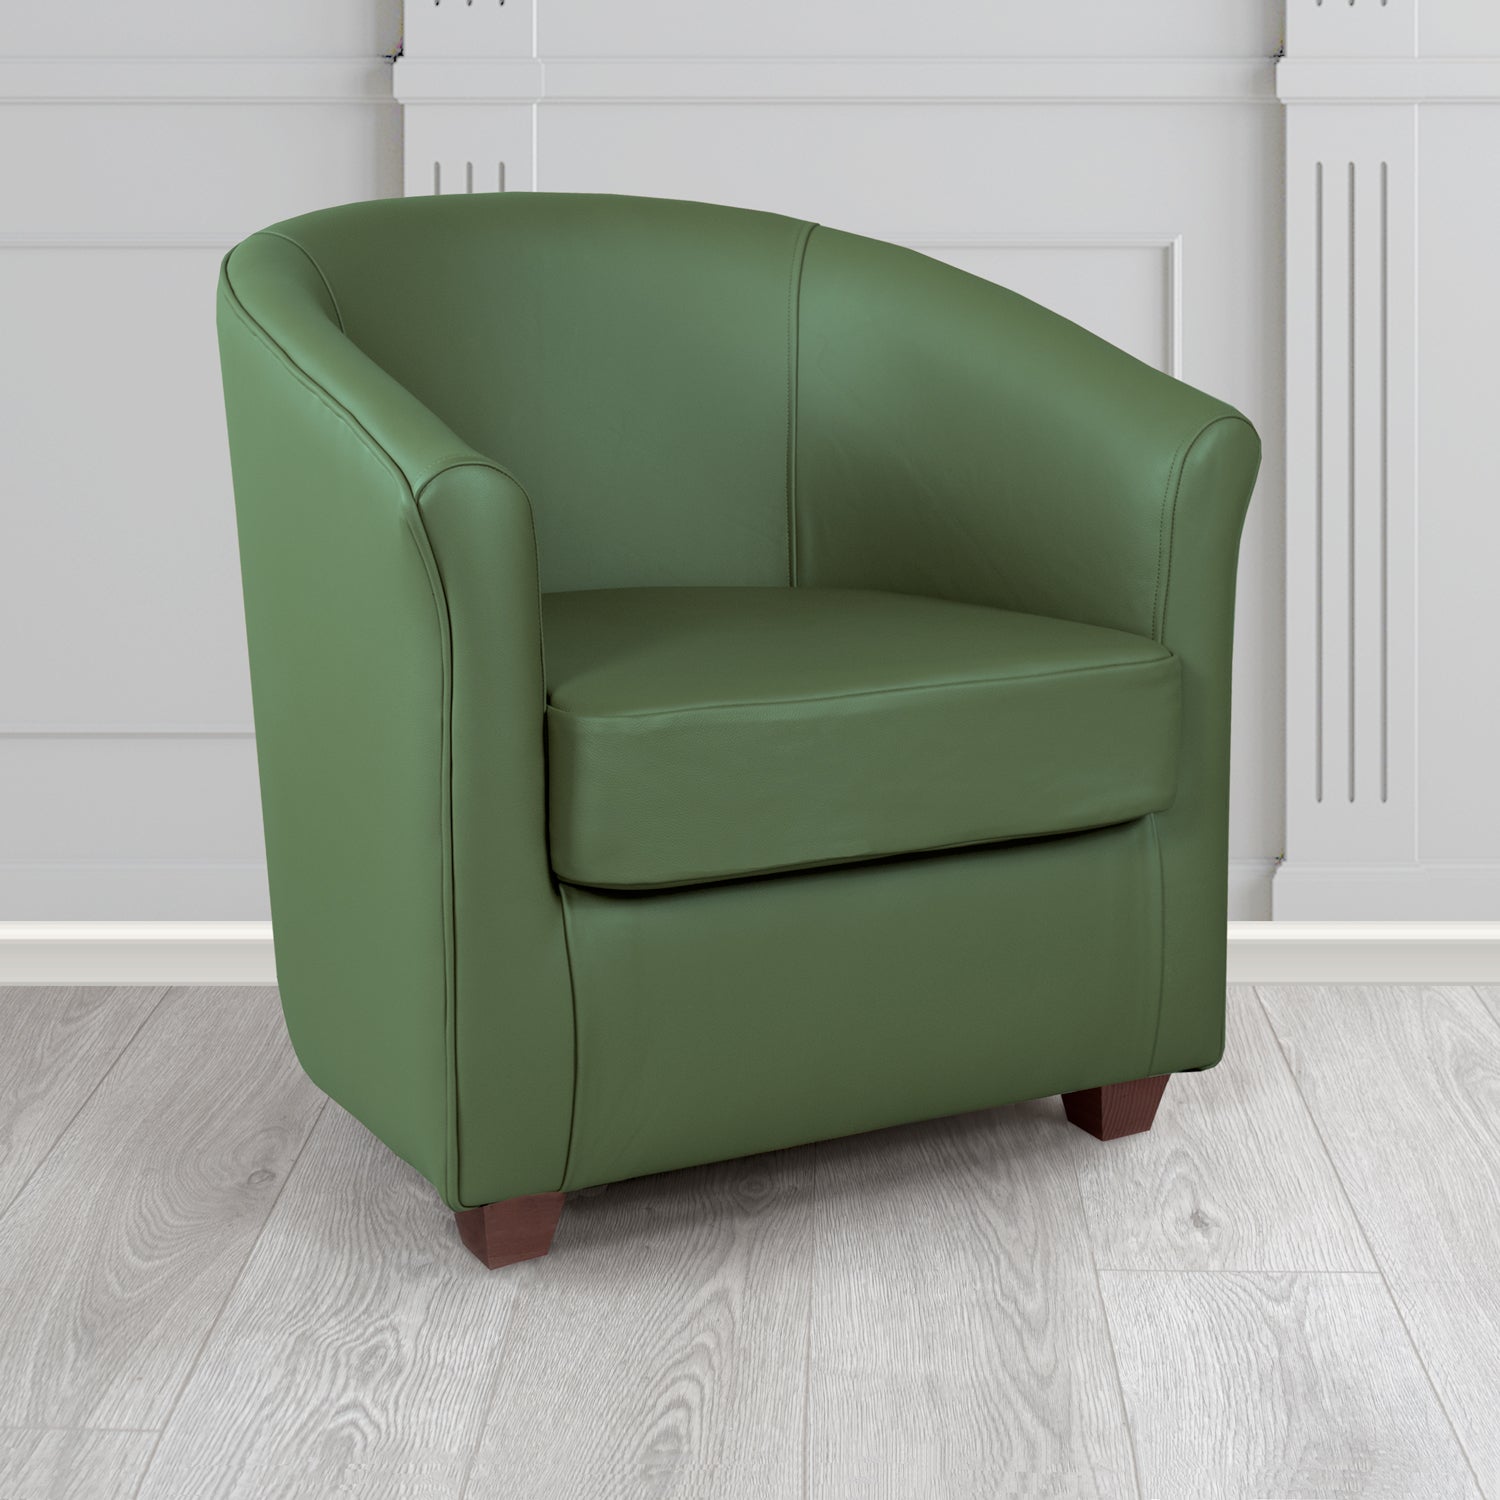 Cannes Shelly Forest Green Crib 5 Genuine Leather Tub Chair - The Tub Chair Shop